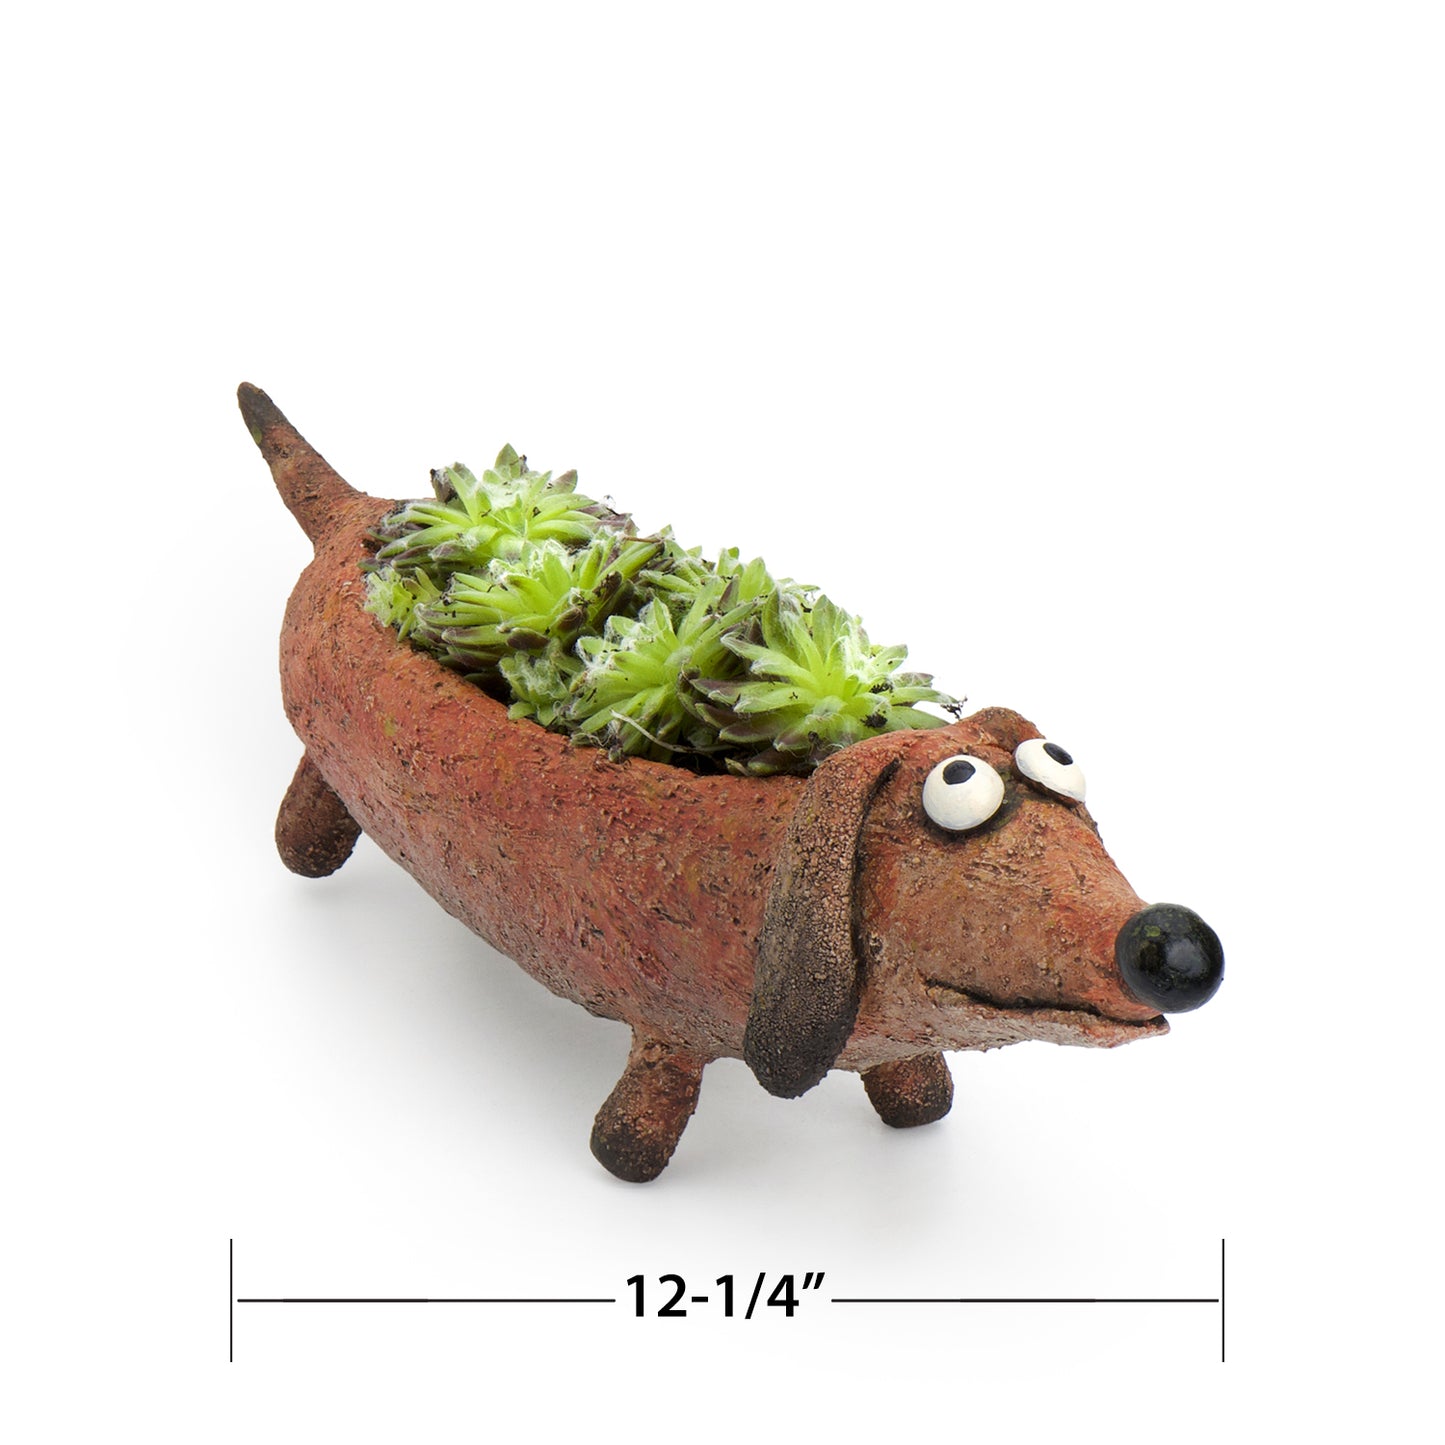 Dobby Doxin the Dog Planter